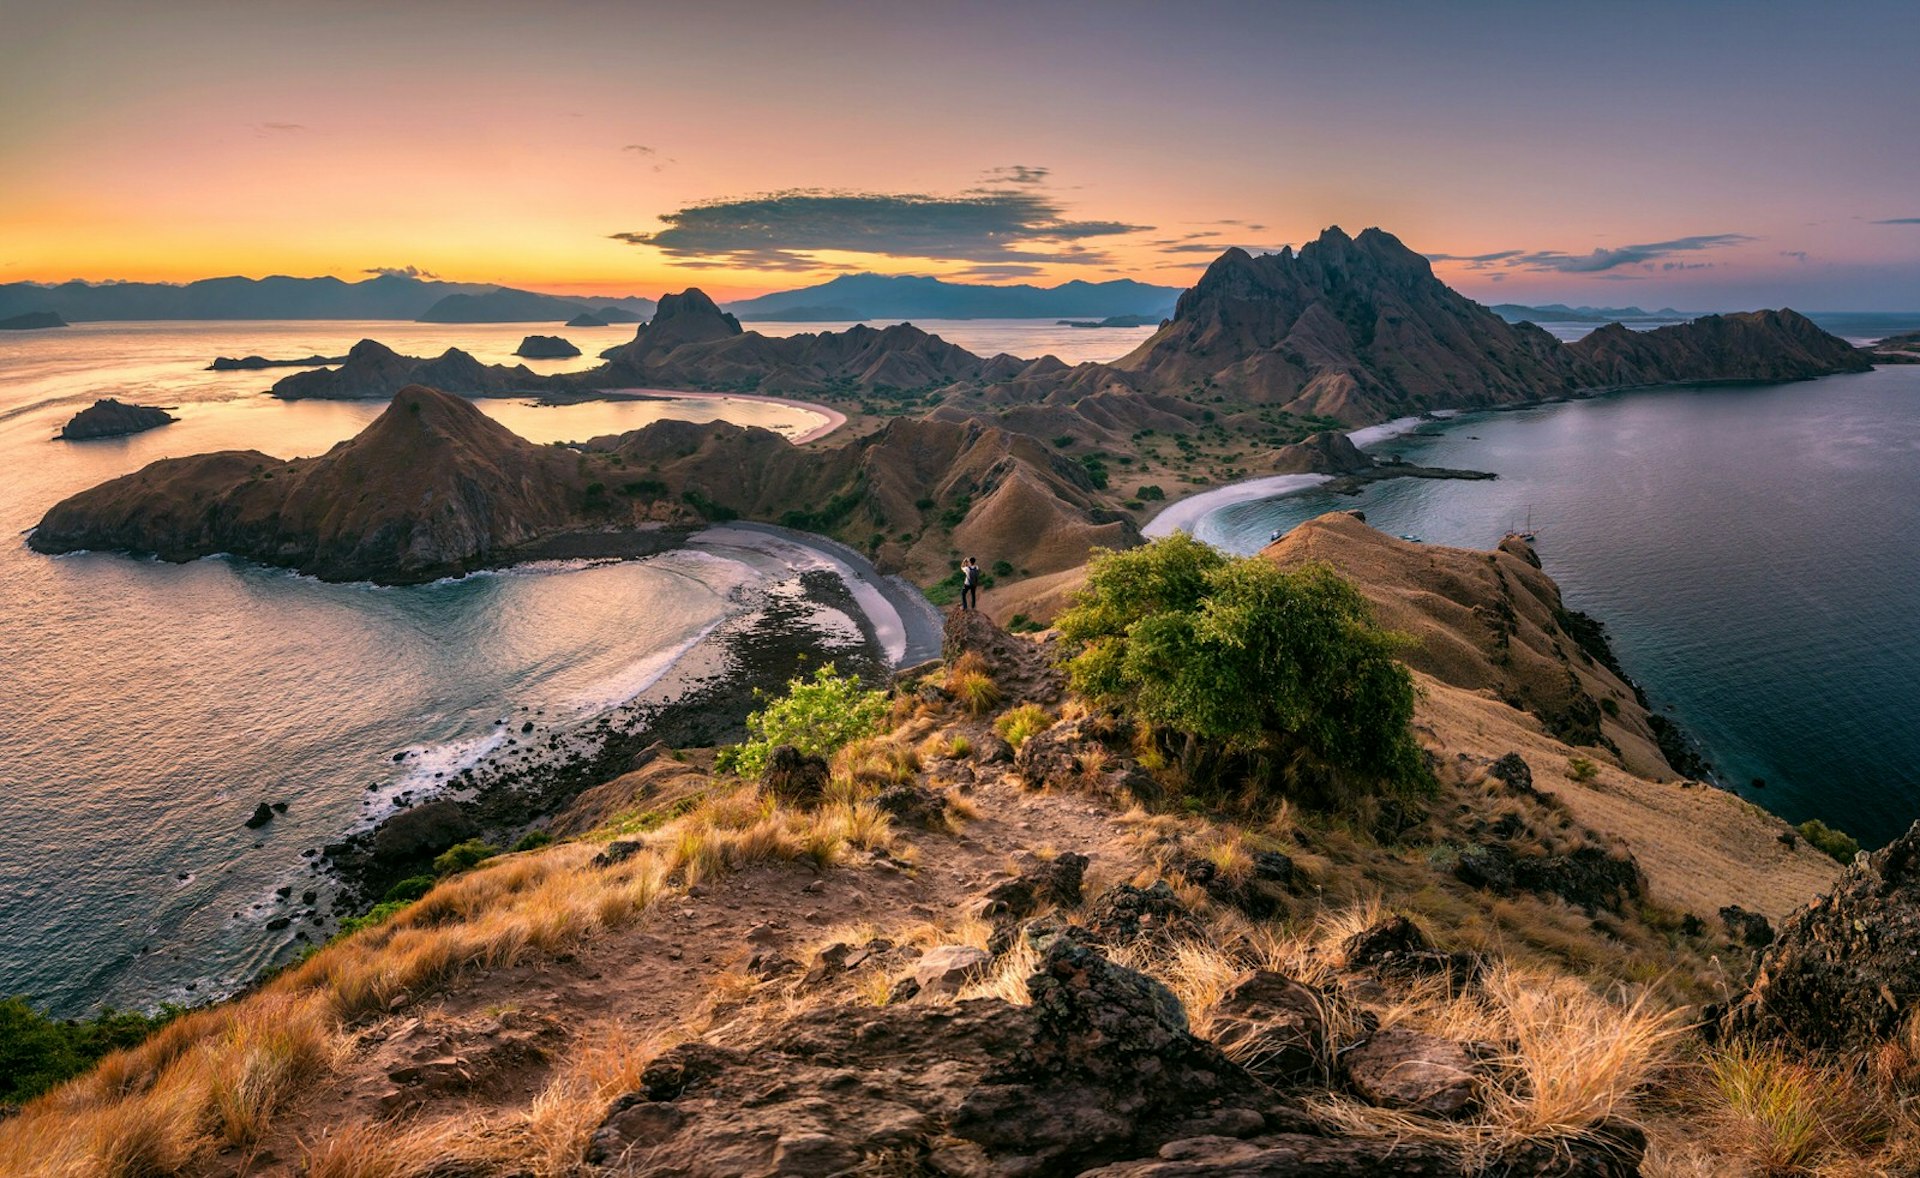 Popular viewpoint on Padar Island in the Komodo National Park © Kongkrit Sukying / Getty Images